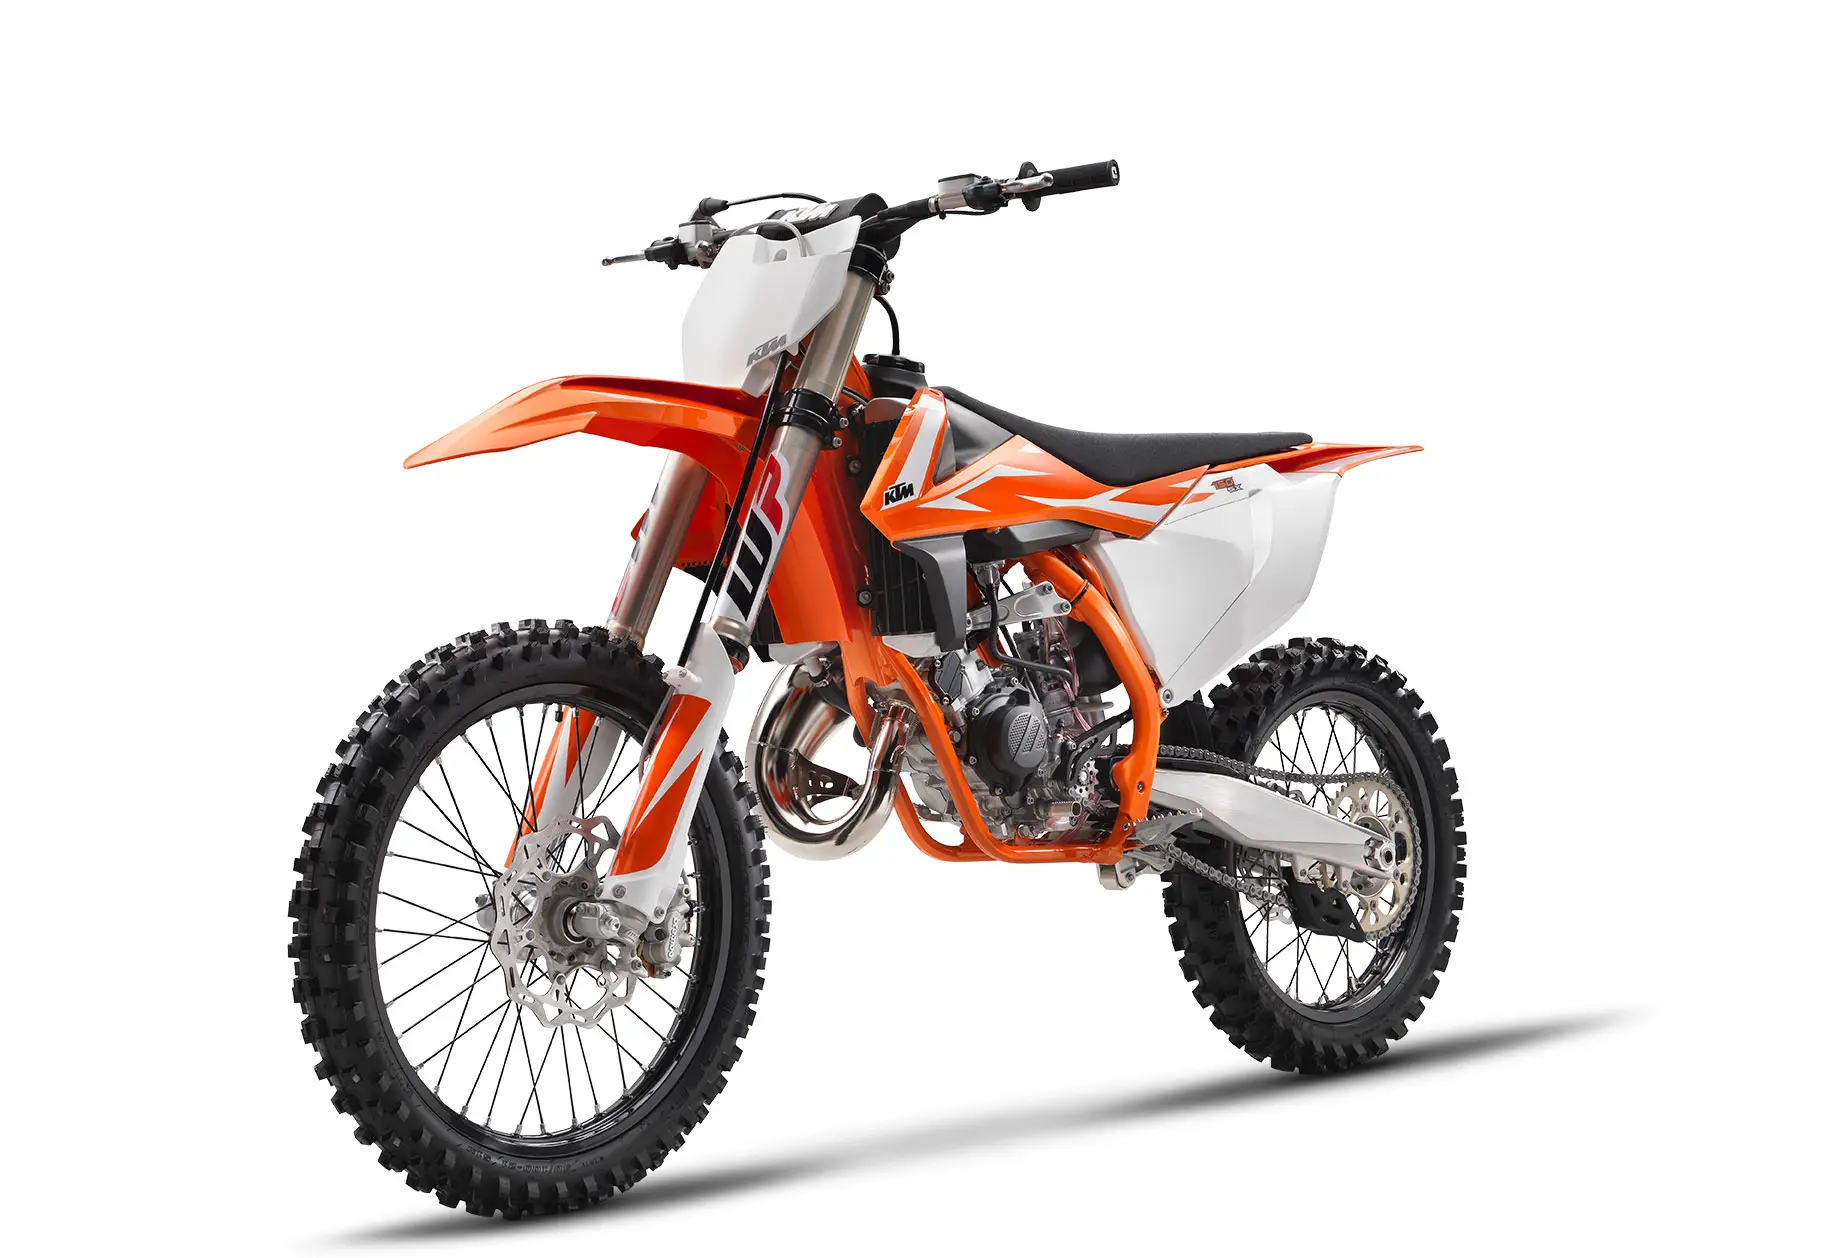 Ktm 150 Sx 2018 Image Gallery, Pictures, Photos